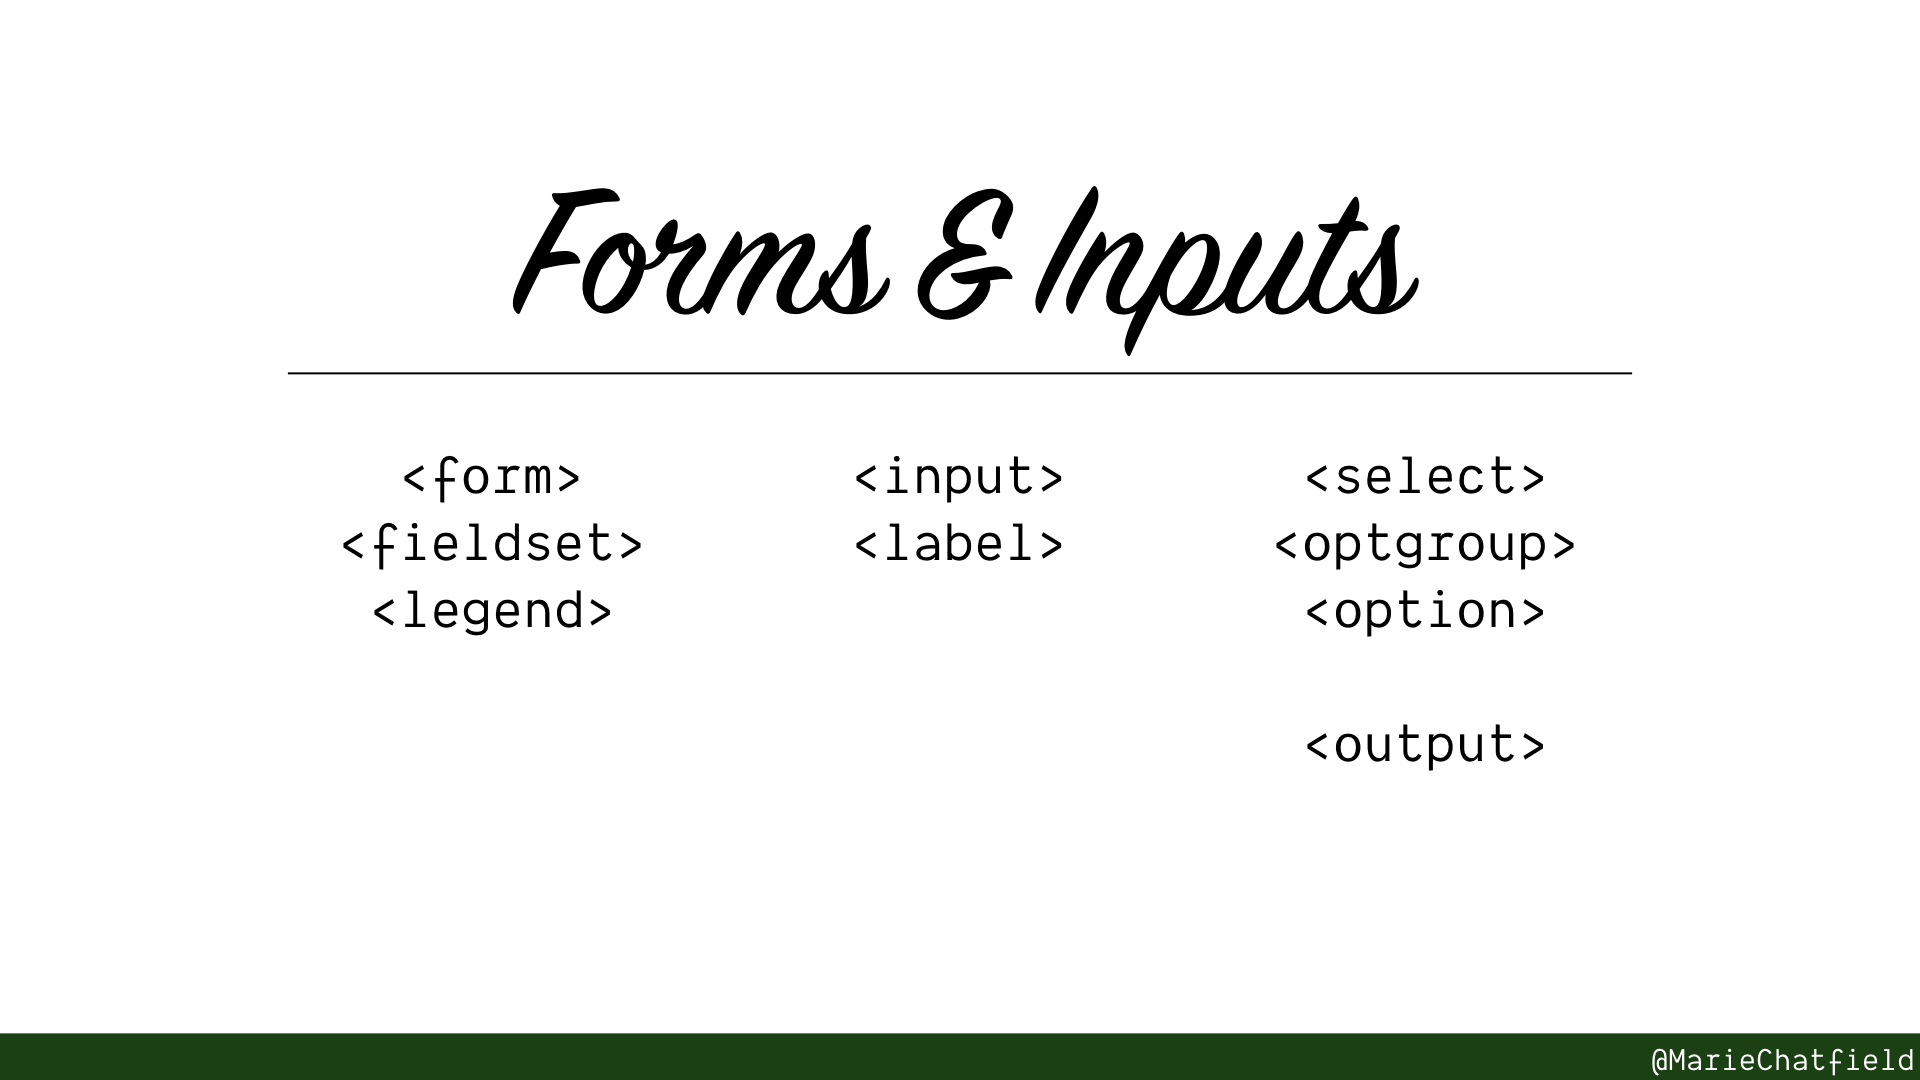 Slide of Forms & Inputs with HTML elements listed